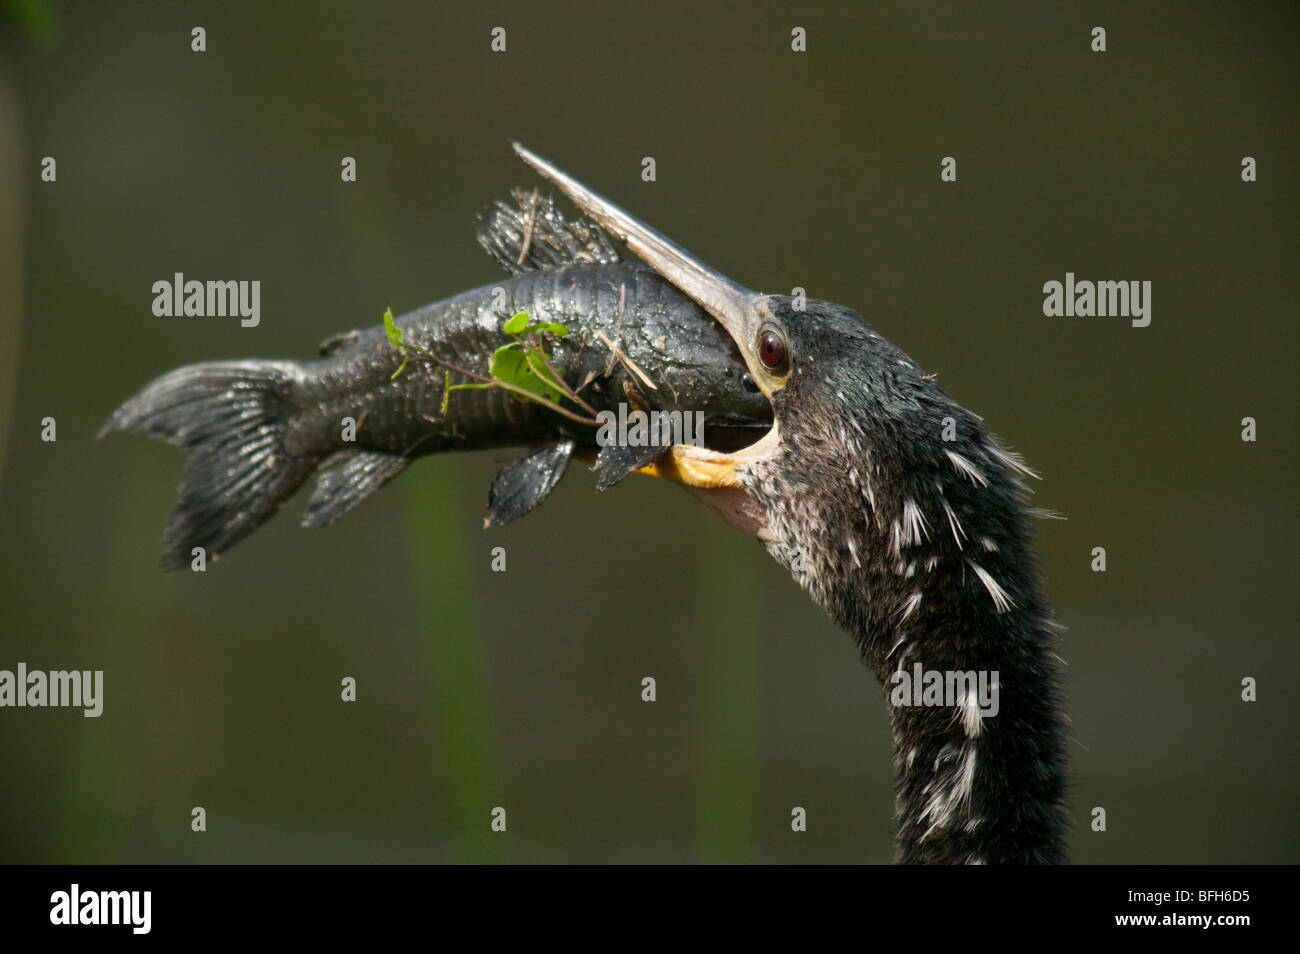 Anhinga in the everglades attempting to swallow an armored catfish. Stock Photo